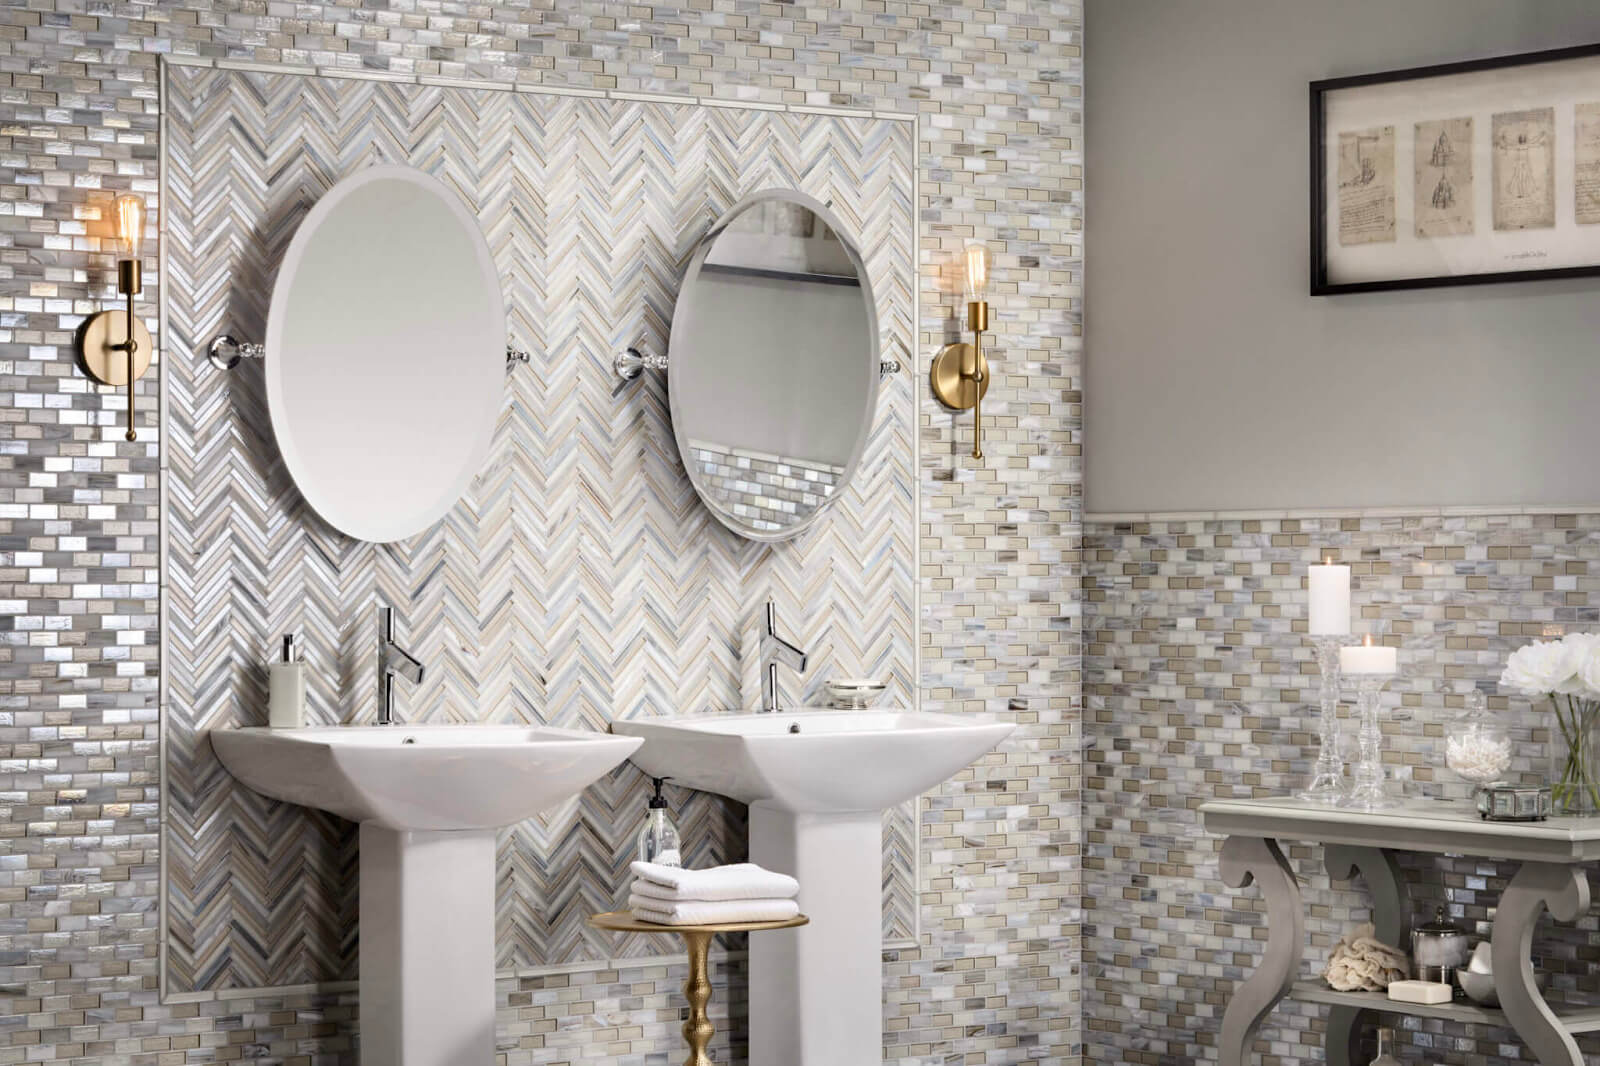 Chevron glass mosaic tile in gray, beige, and cream